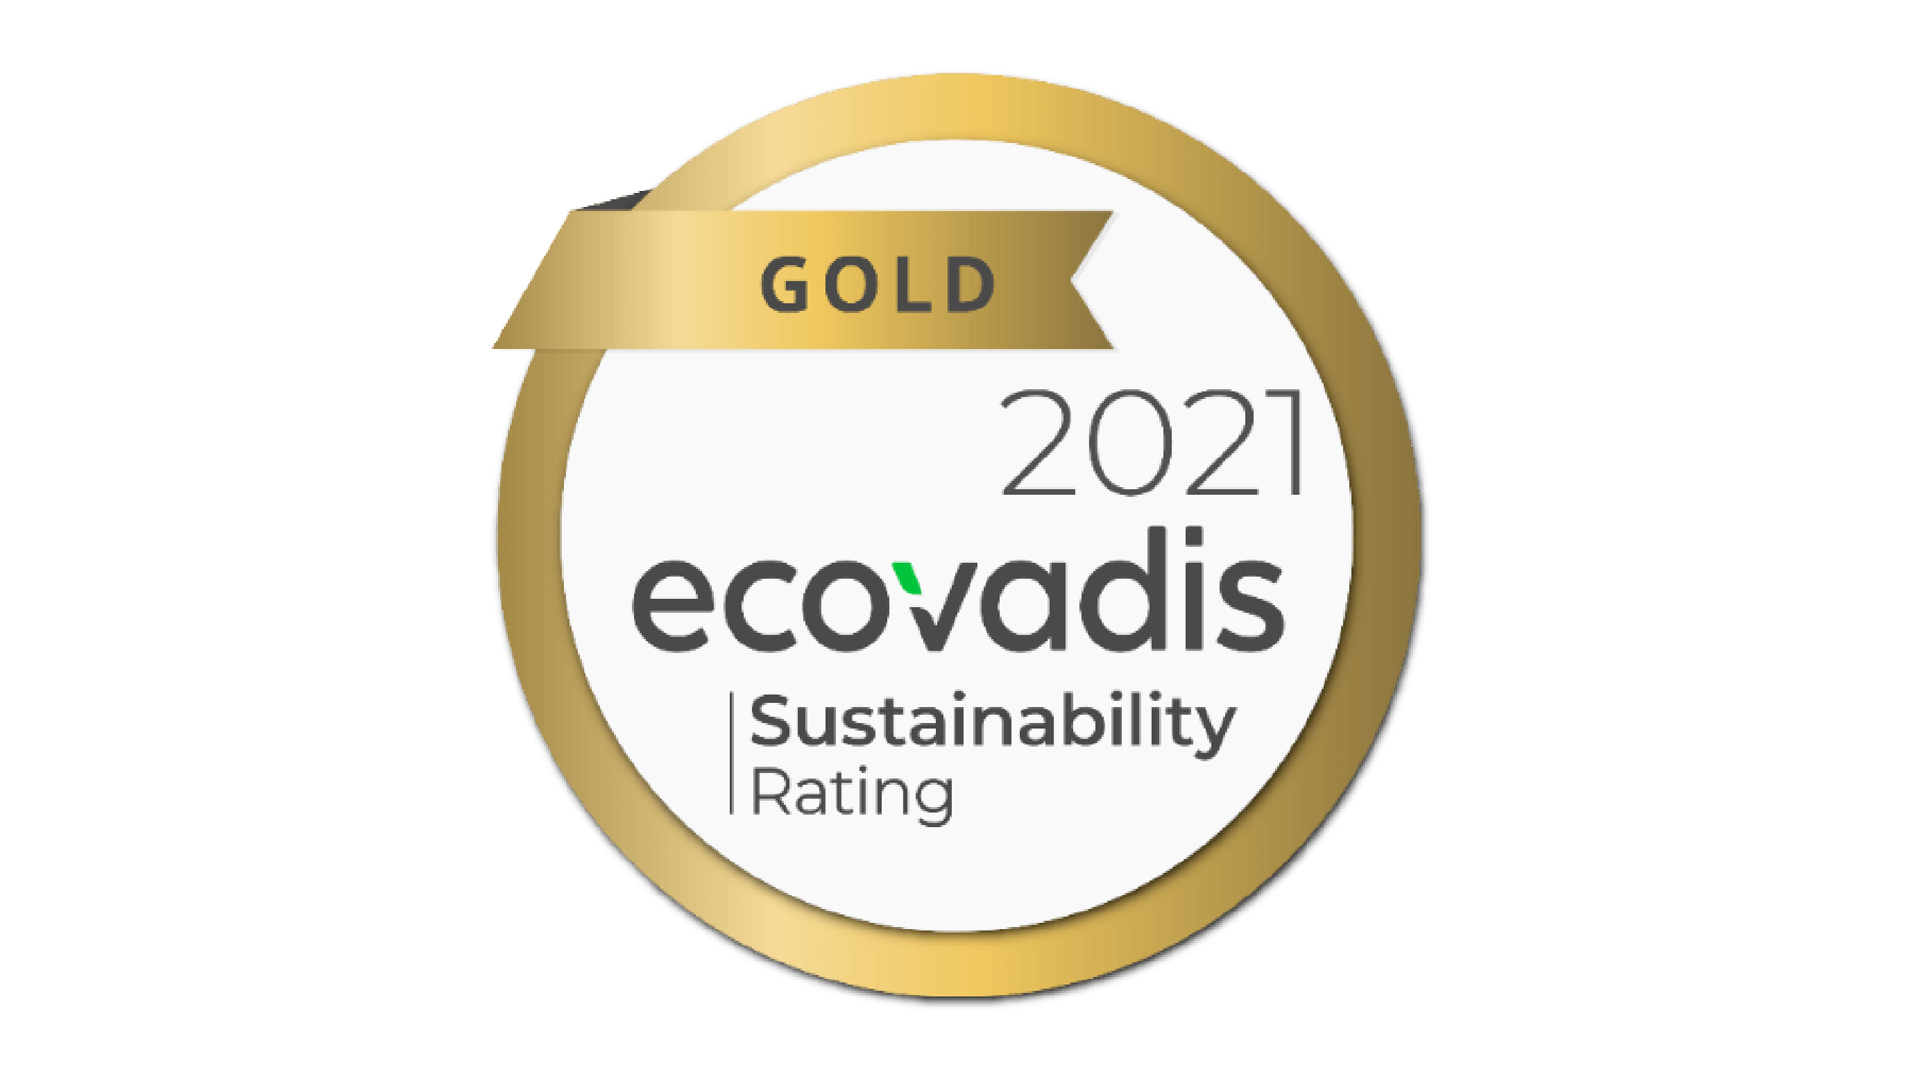 FCC awarded with gold medal by EcoVadis